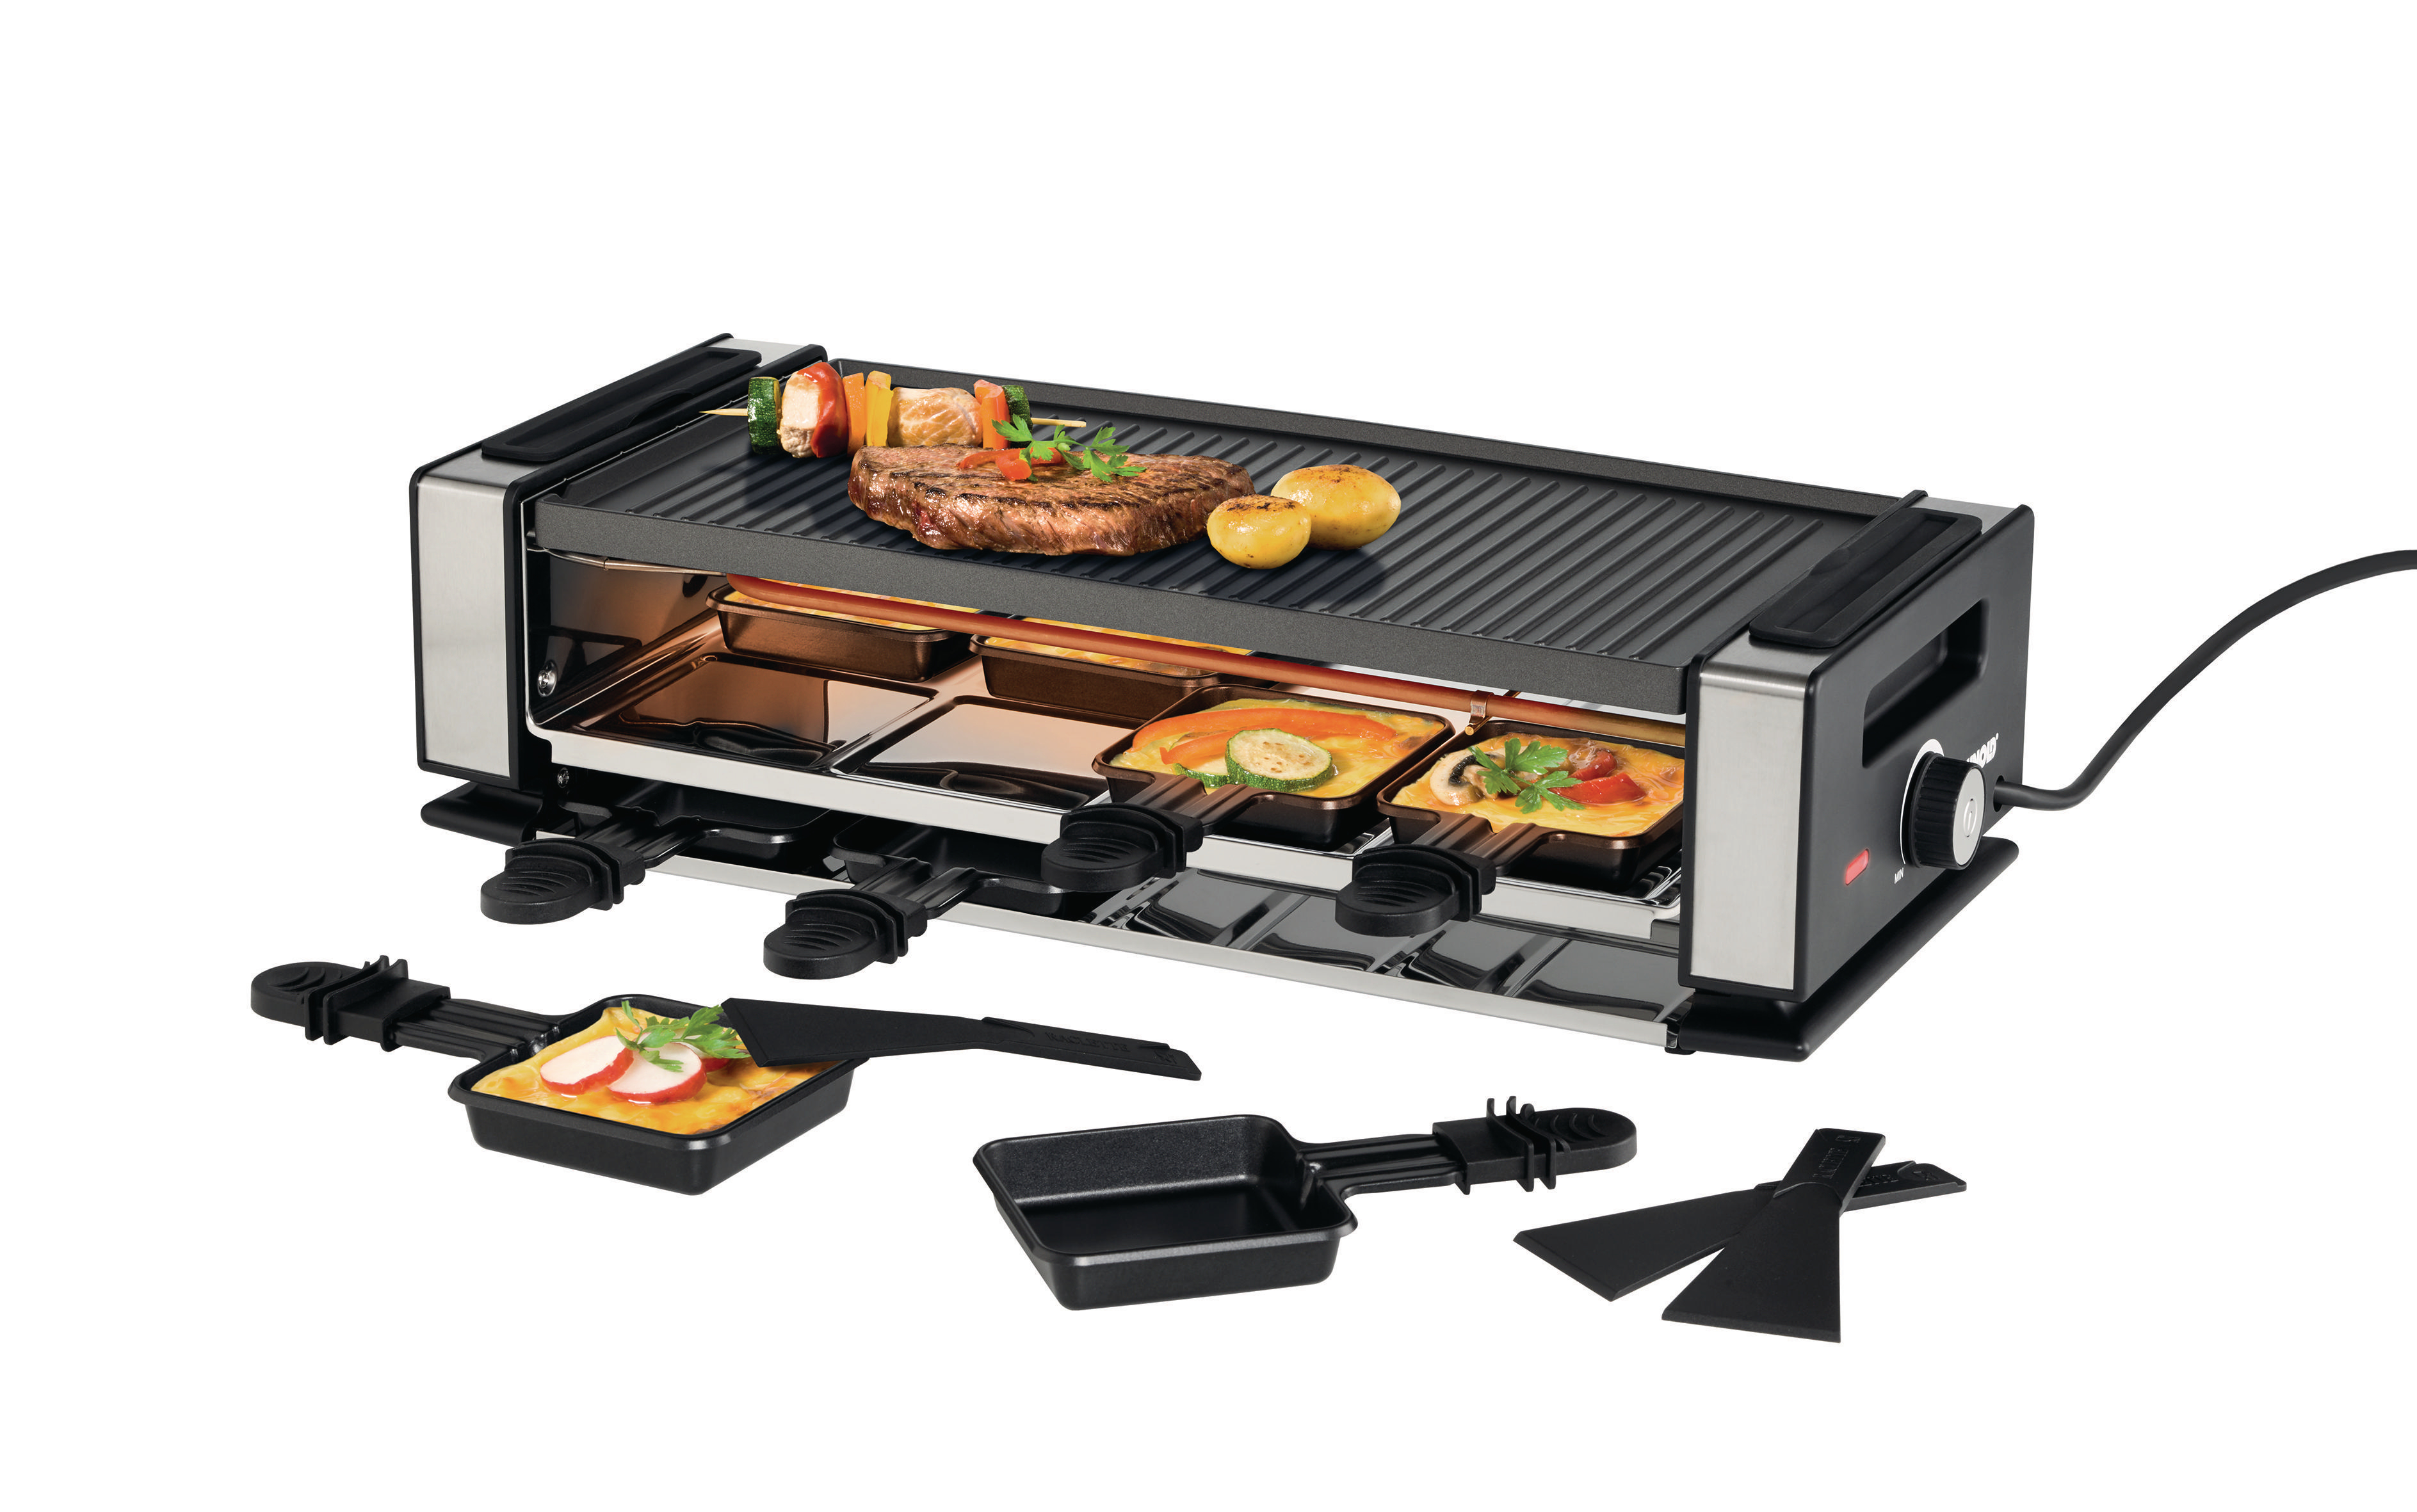 UNOLD 48785 Smokeless Raclette